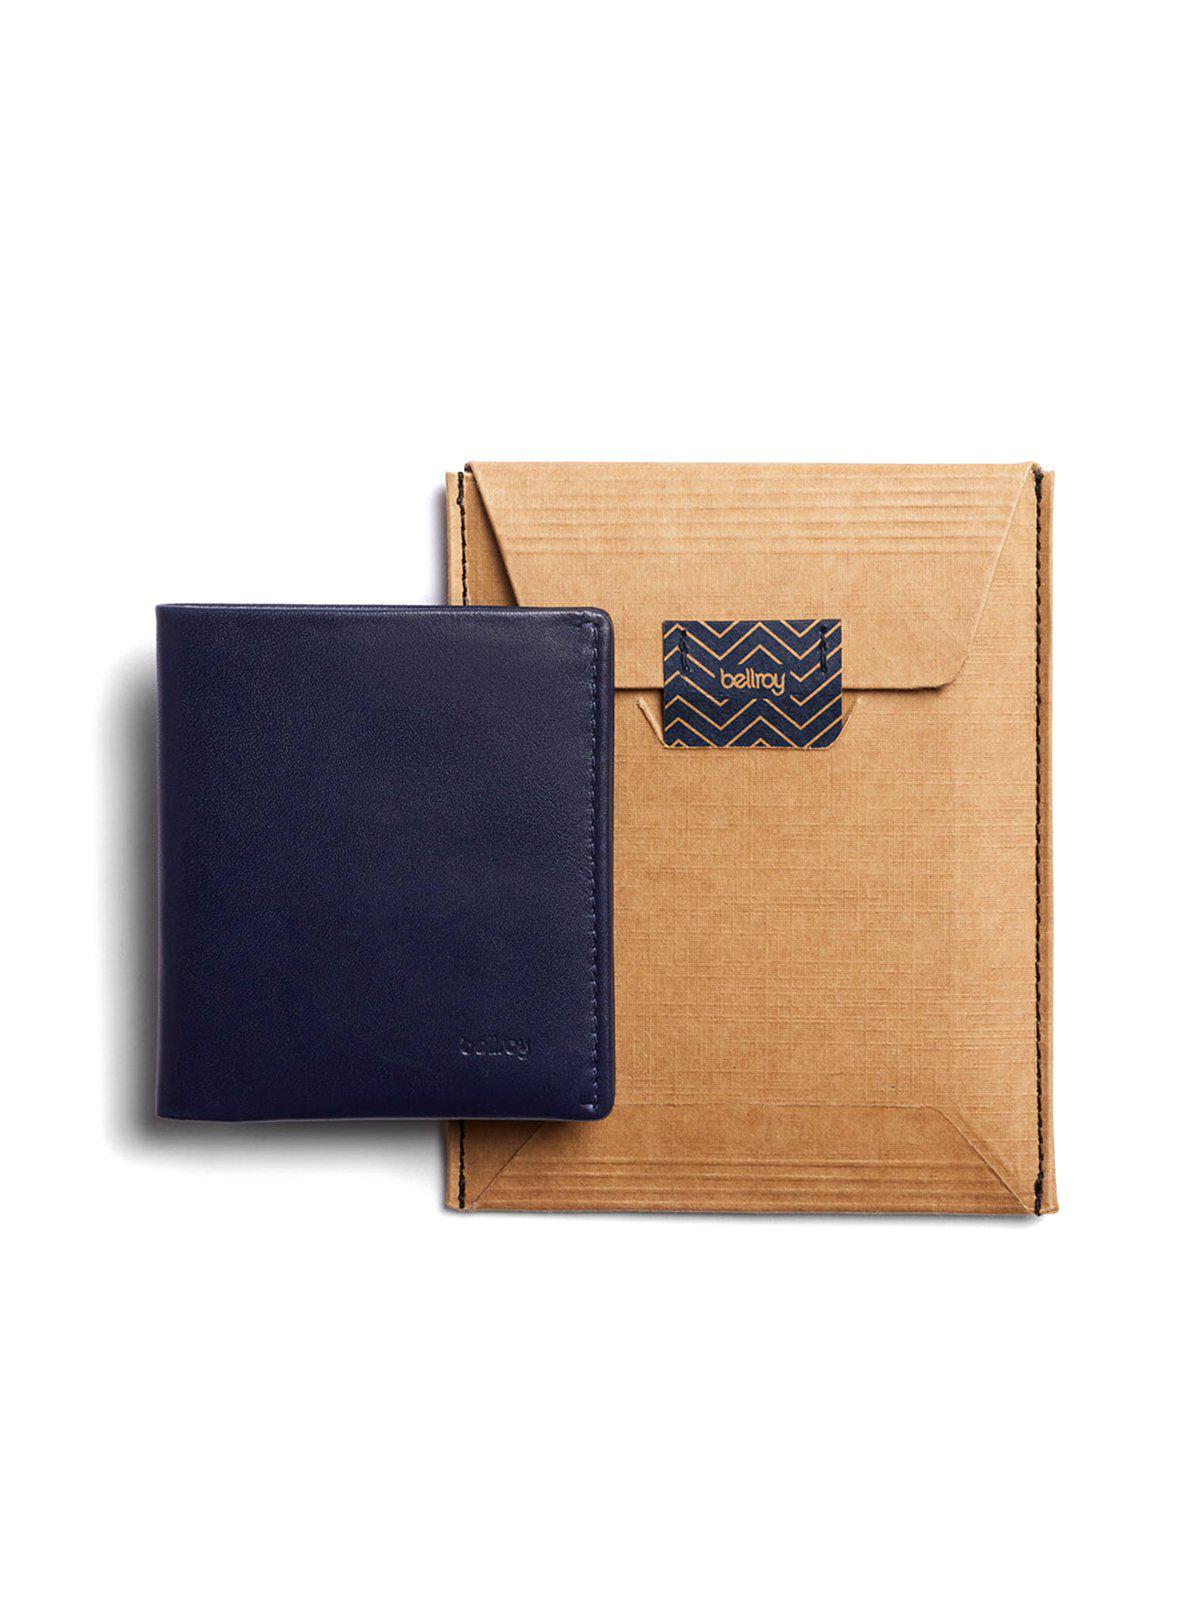 Bellroy Note Sleeve Wallet Navy RFID - MORE by Morello Indonesia